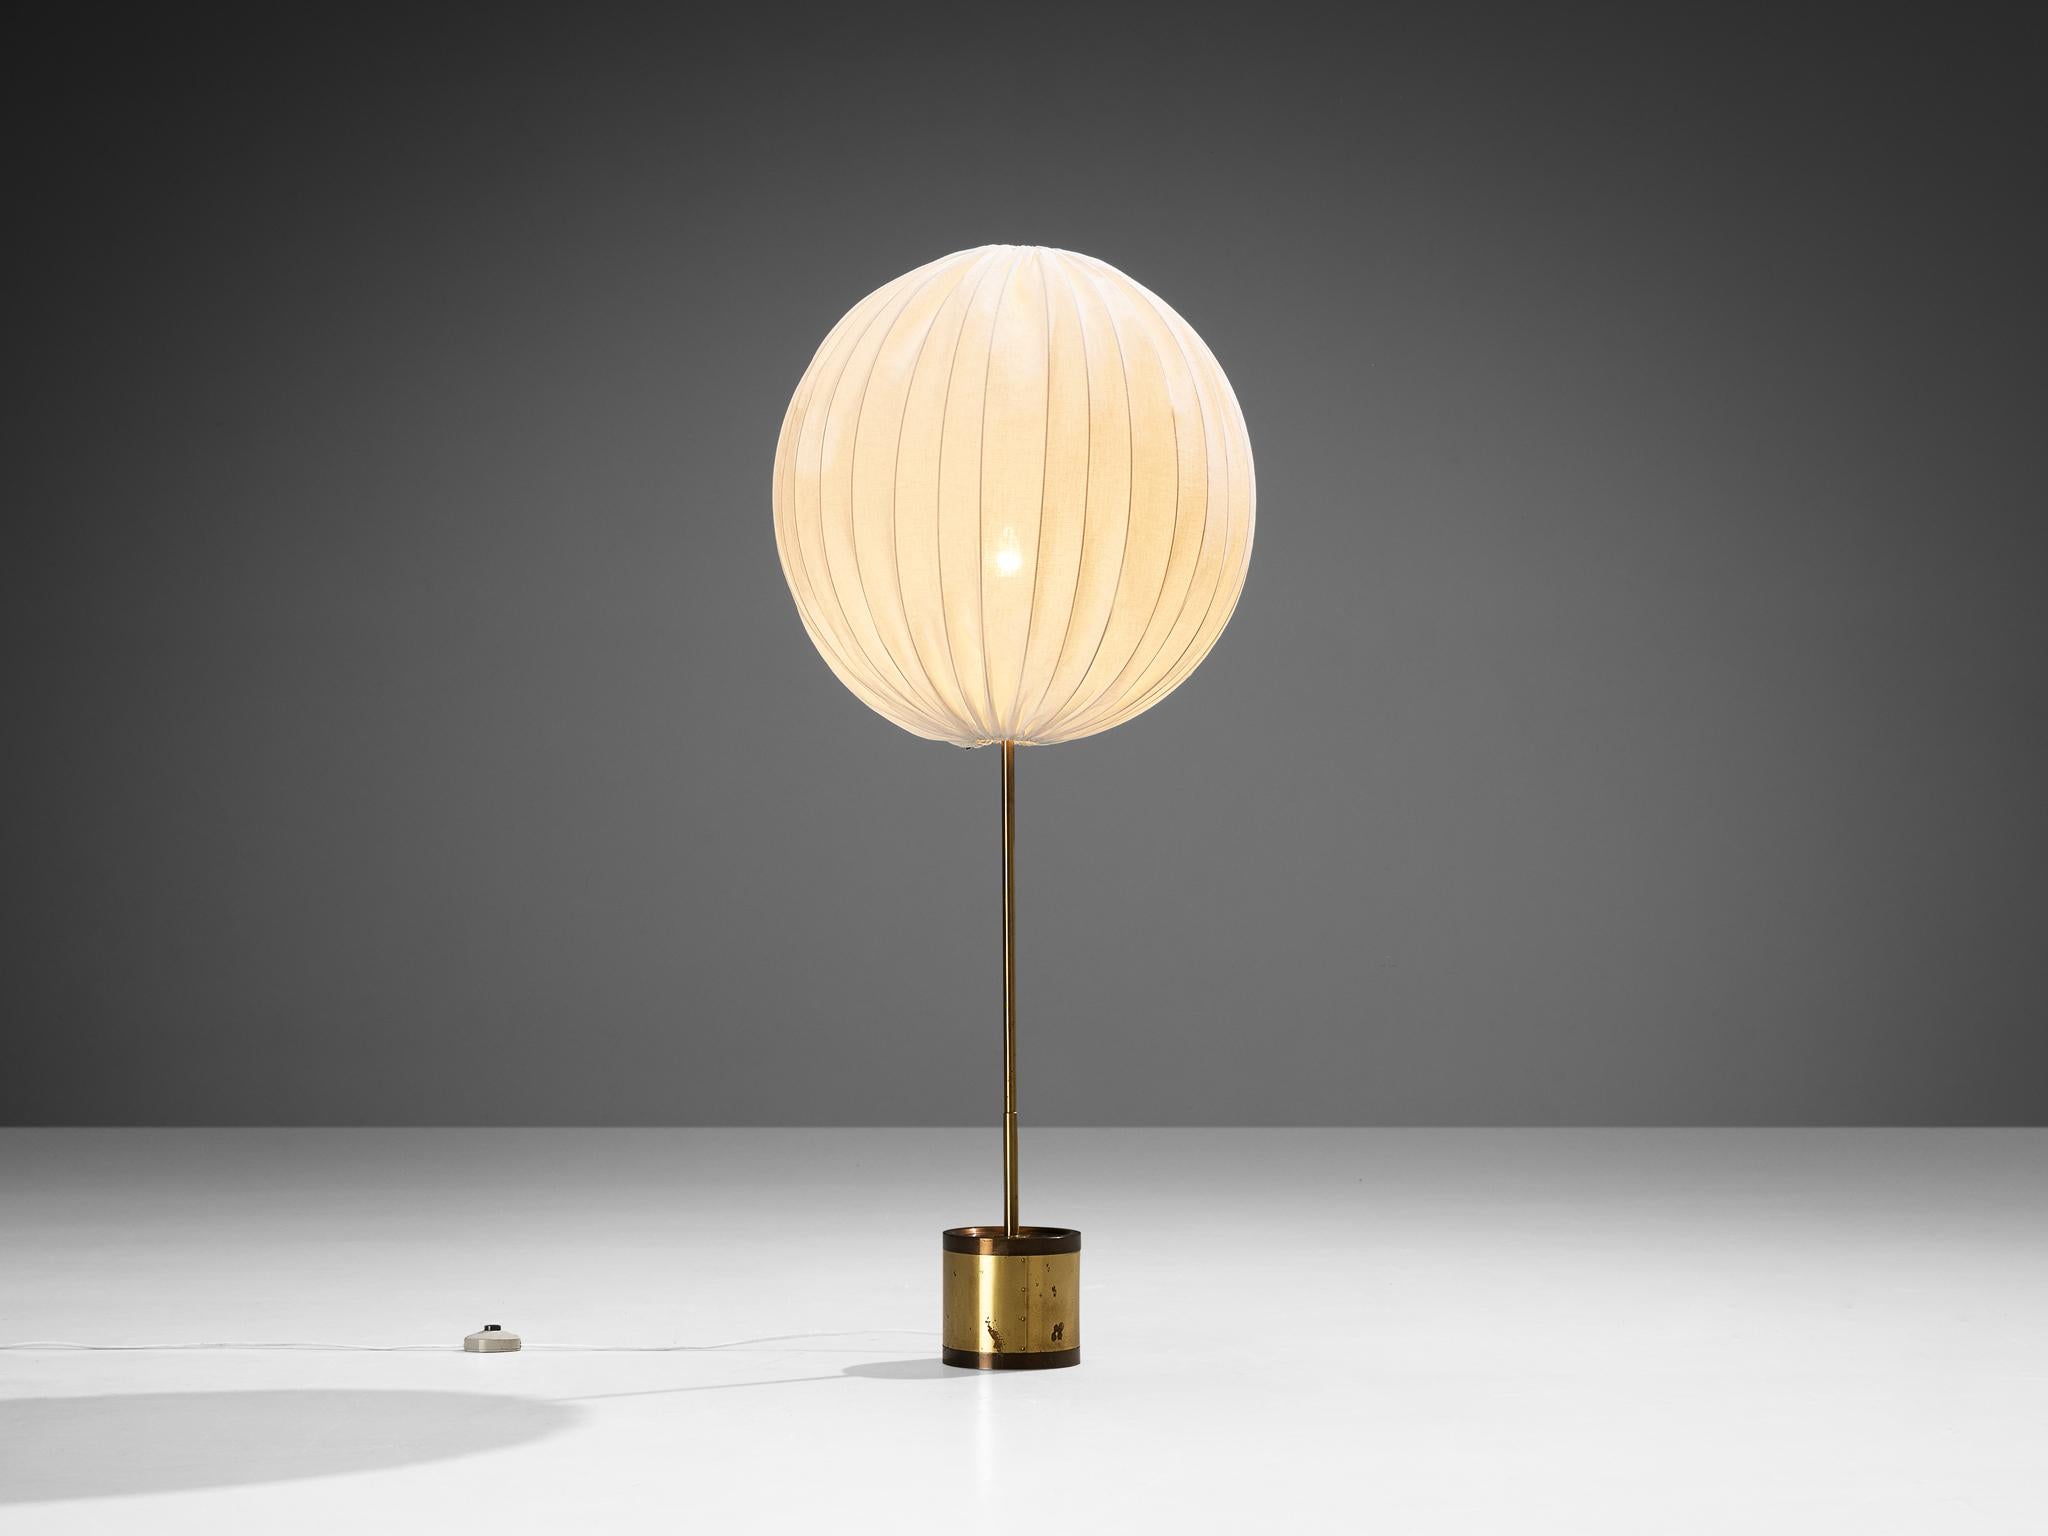 Metal Hans Agne Jakobsson 'Balloon' Floor Lamp with Off-White Shade